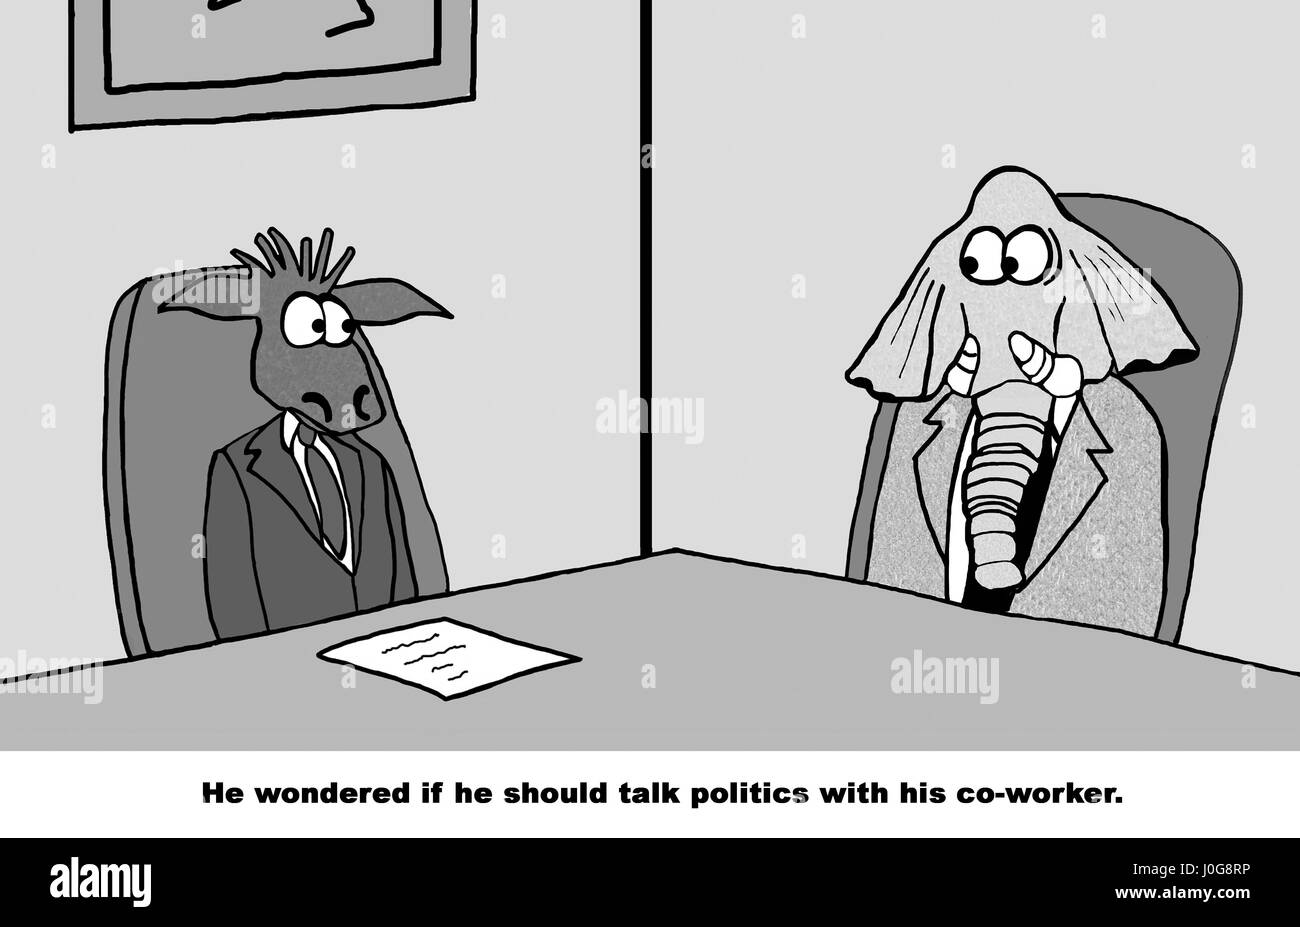 Business cartoon about a liberal and a conservative wondering if they should talk politics at work. Stock Photo